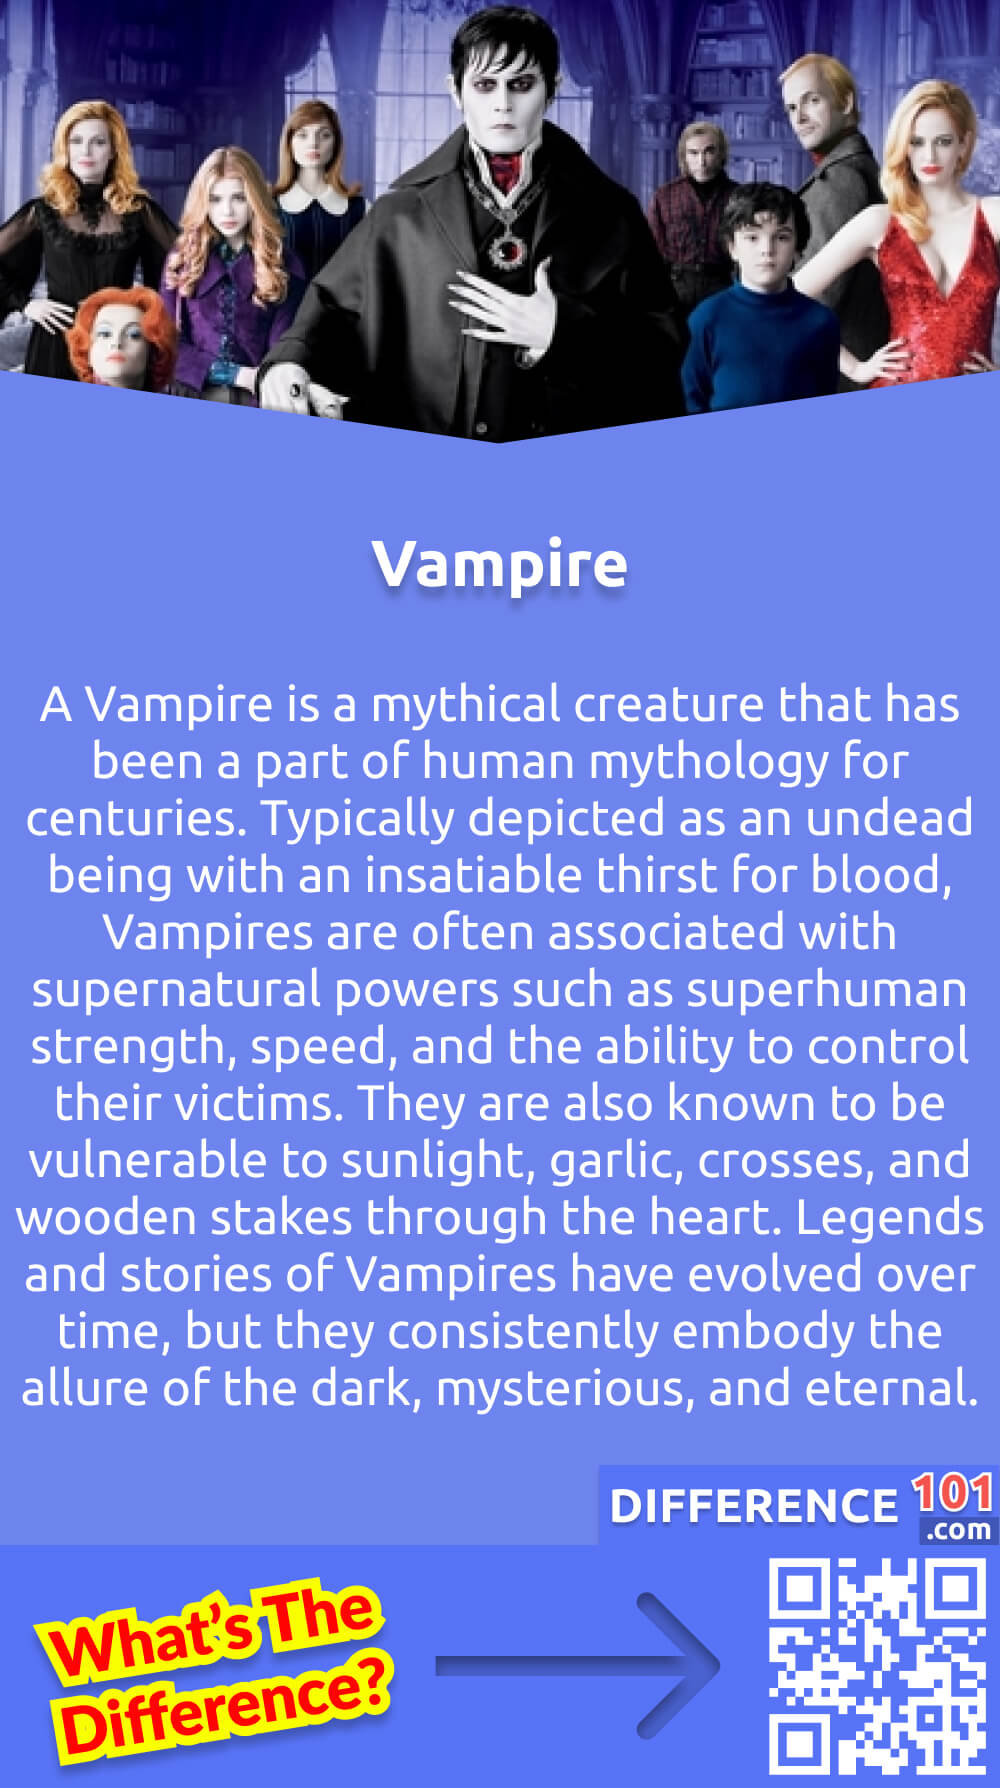 What Is Vampire? A Vampire is a mythical creature that has been a part of human mythology for centuries. Typically depicted as an undead being with an insatiable thirst for blood, Vampires are often associated with supernatural powers such as superhuman strength, speed, and the ability to control their victims. They are also known to be vulnerable to sunlight, garlic, crosses, and wooden stakes through the heart. Legends and stories of Vampires have evolved over time, but they consistently embody the allure of the dark, mysterious, and eternal. Despite being fictional, the concept of Vampires has captured the imagination of cultures worldwide and continues to fascinate people to this day.